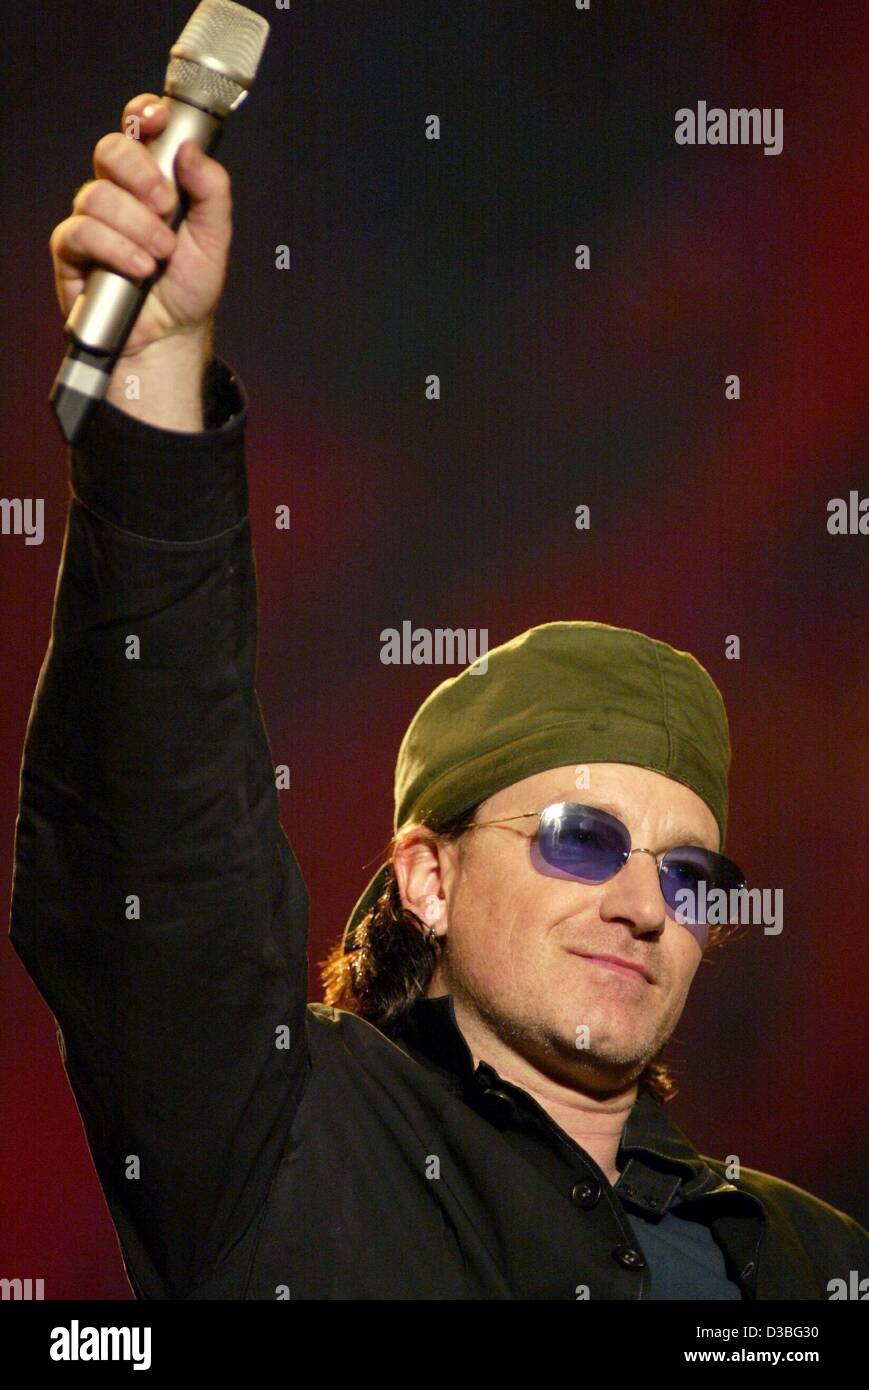 (dpa) - Bono, singer of the Irish rock band U2, holds a microphone in his hand and waves during his performance at the '10th Pavarotti and Friends' charity concert in Modena, Italy, 27 May 2003. Stock Photo